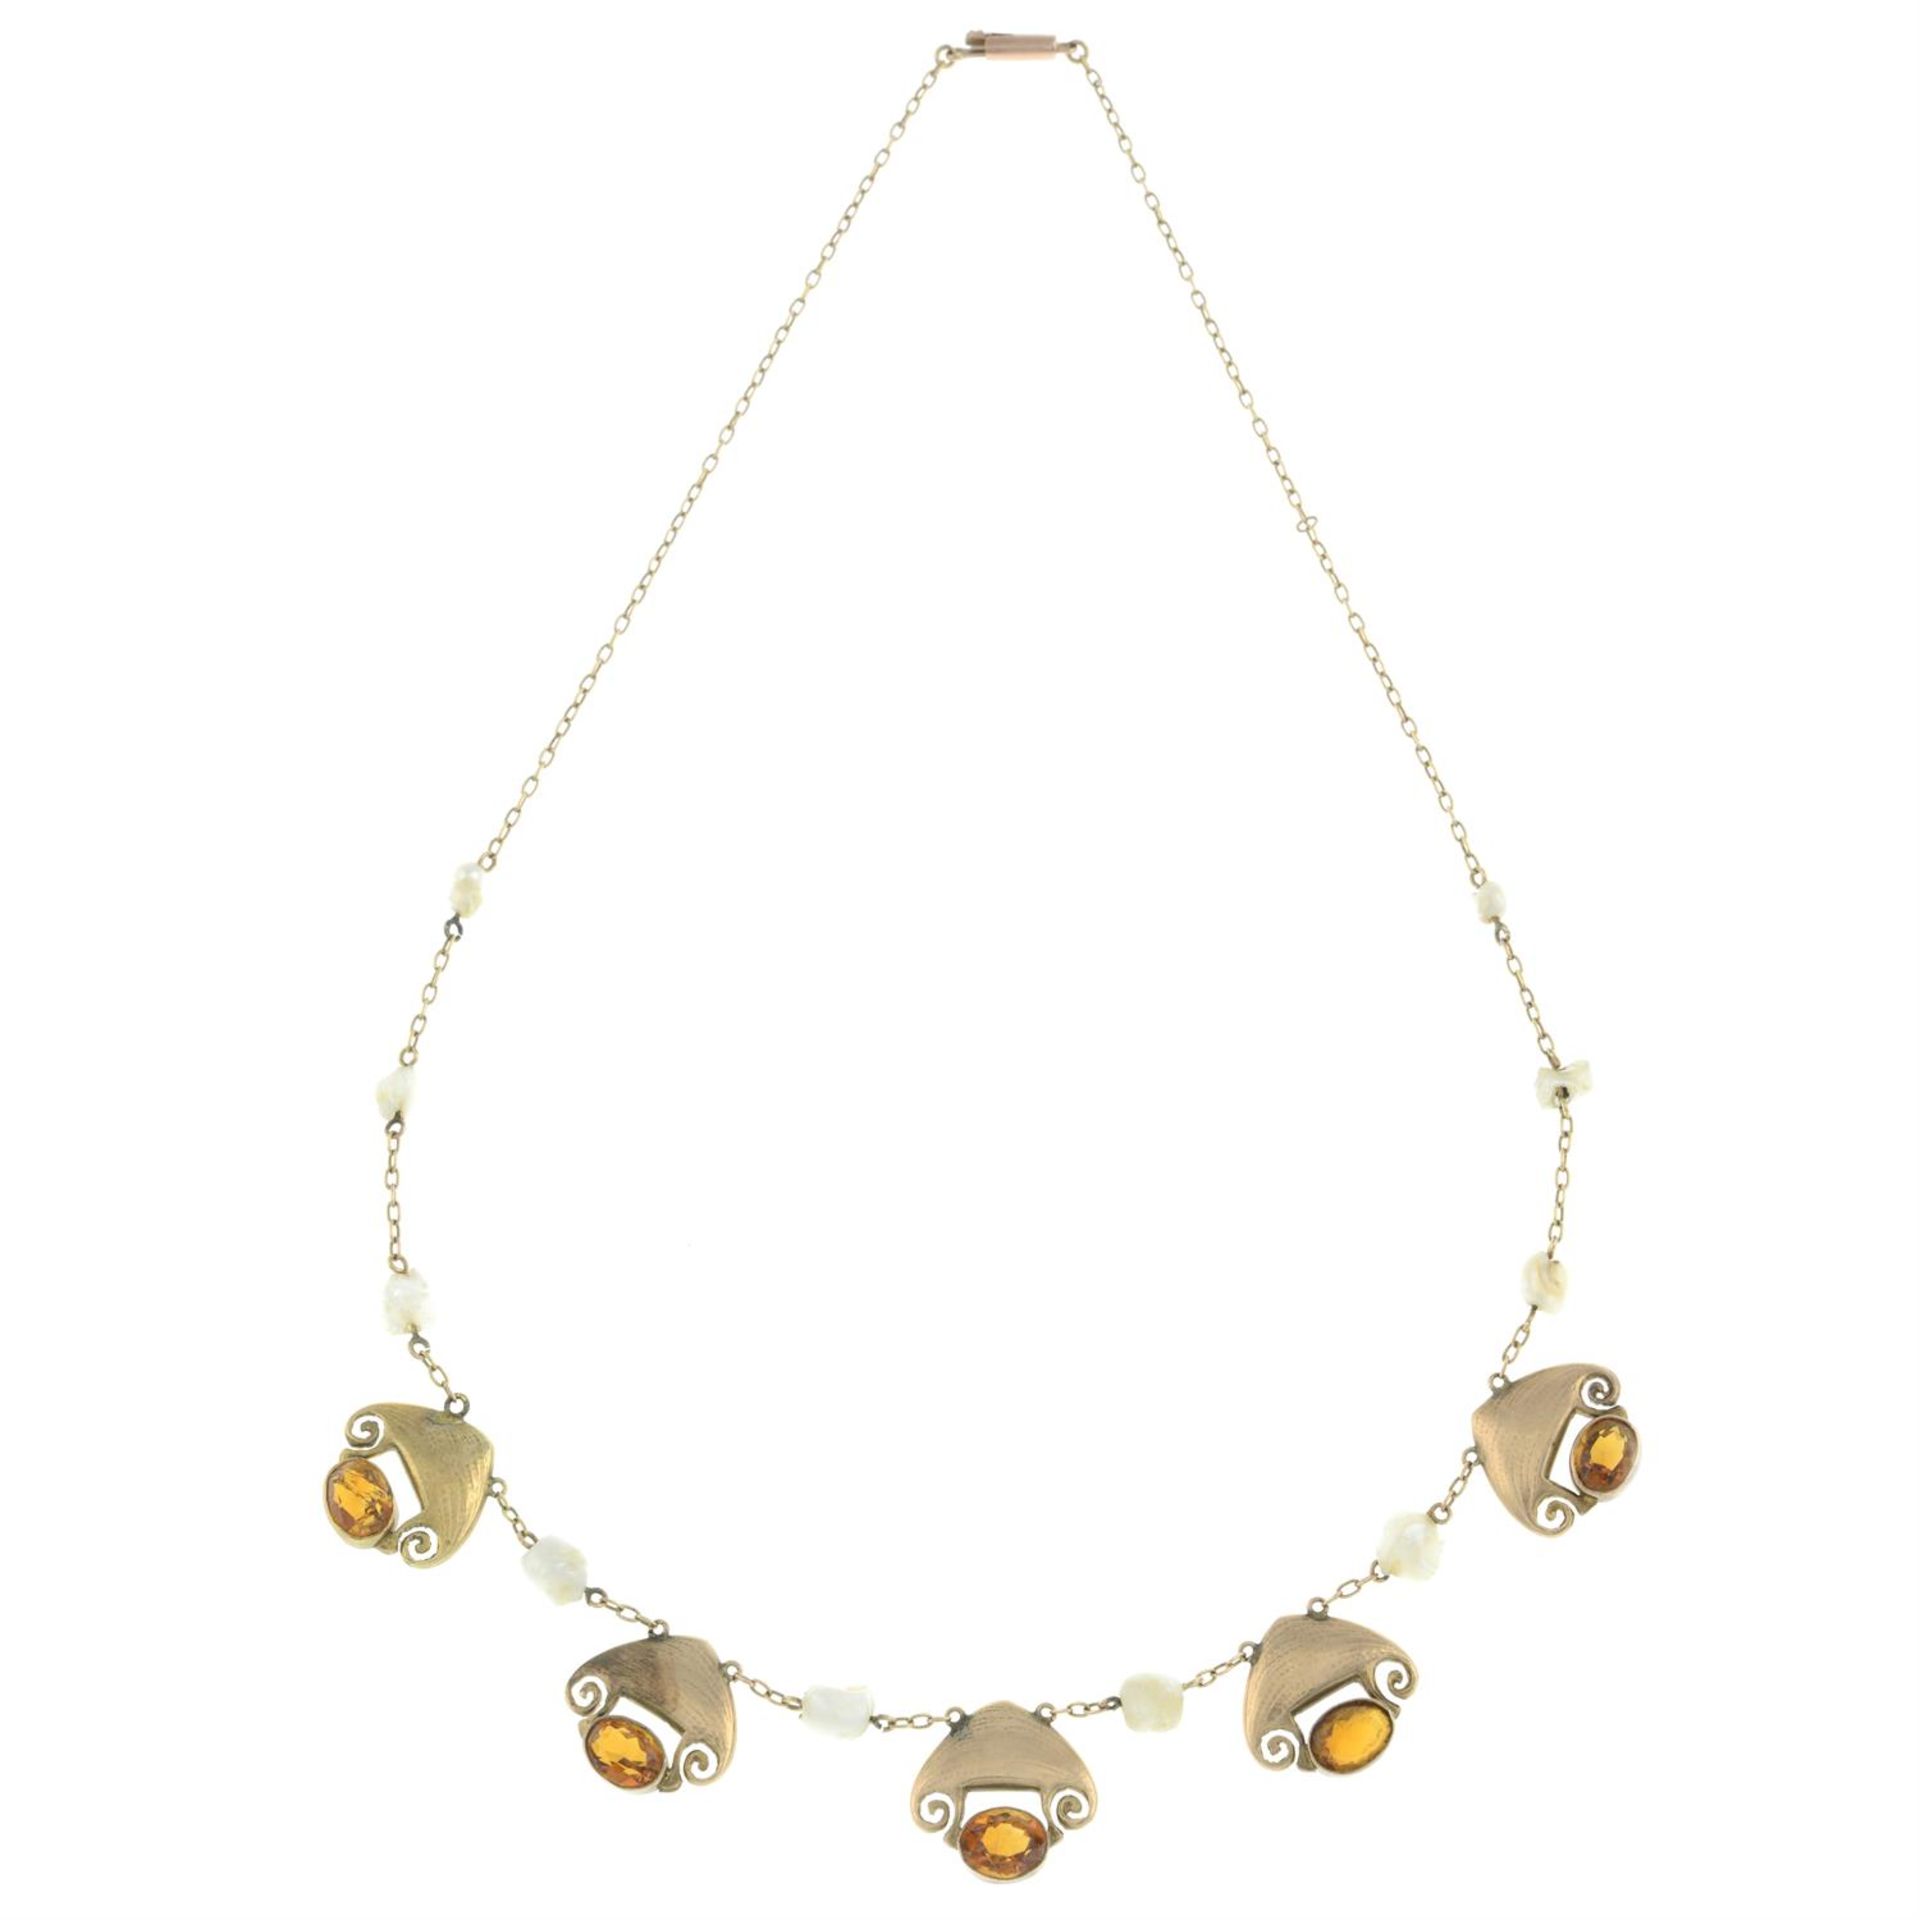 Citrine and baroque pearl necklace, by Liberty & Co. - Image 3 of 6